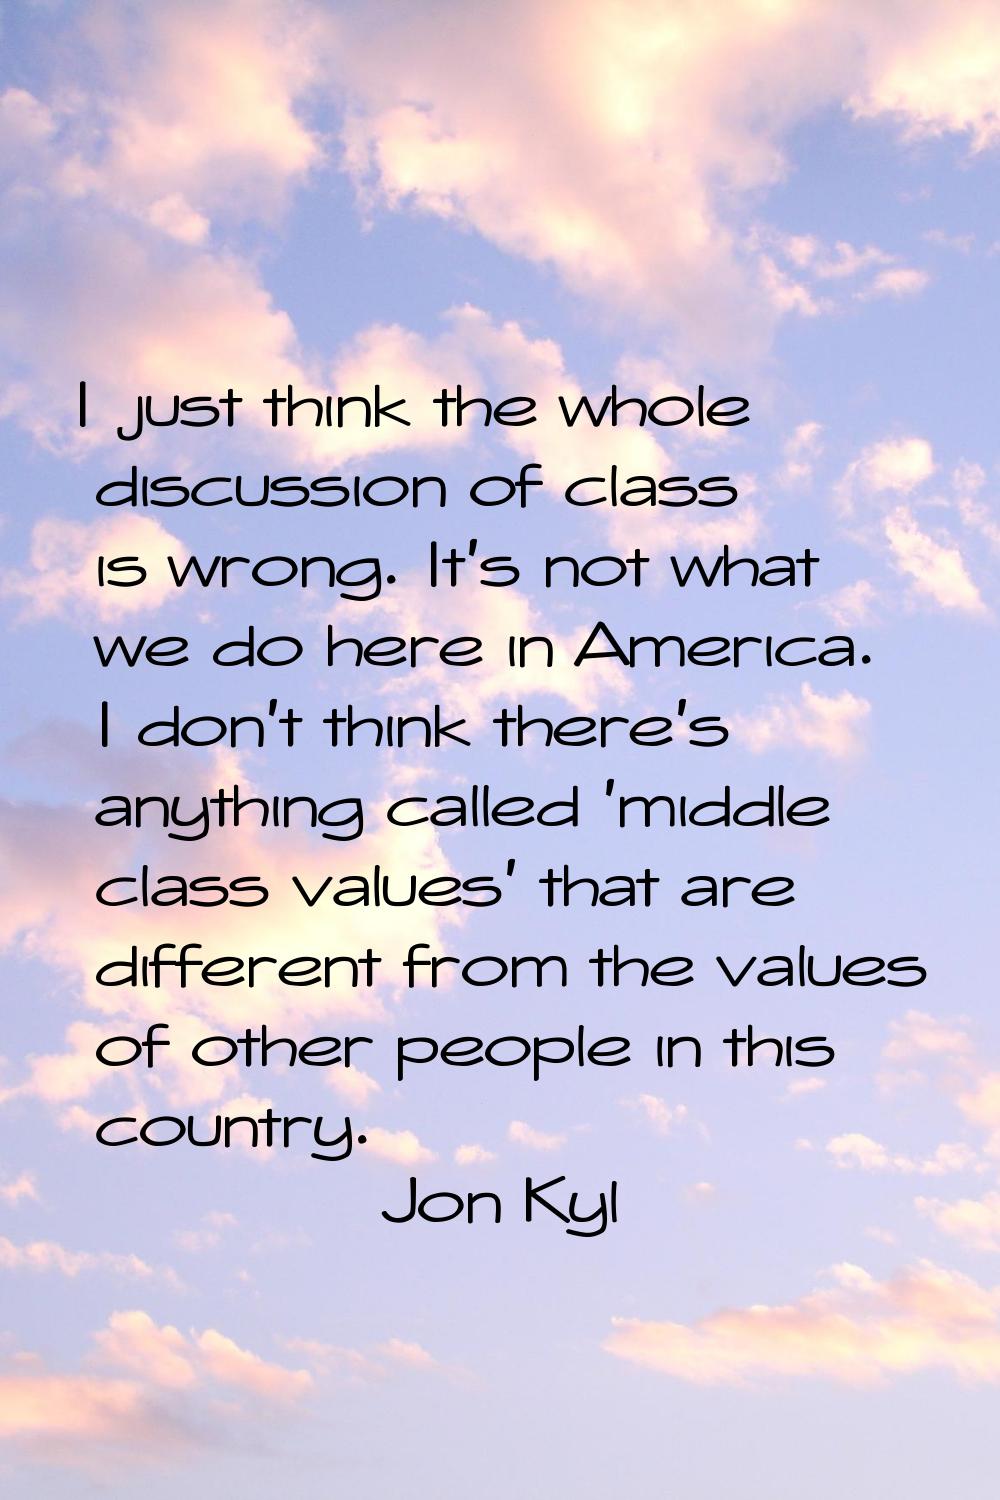 I just think the whole discussion of class is wrong. It's not what we do here in America. I don't t